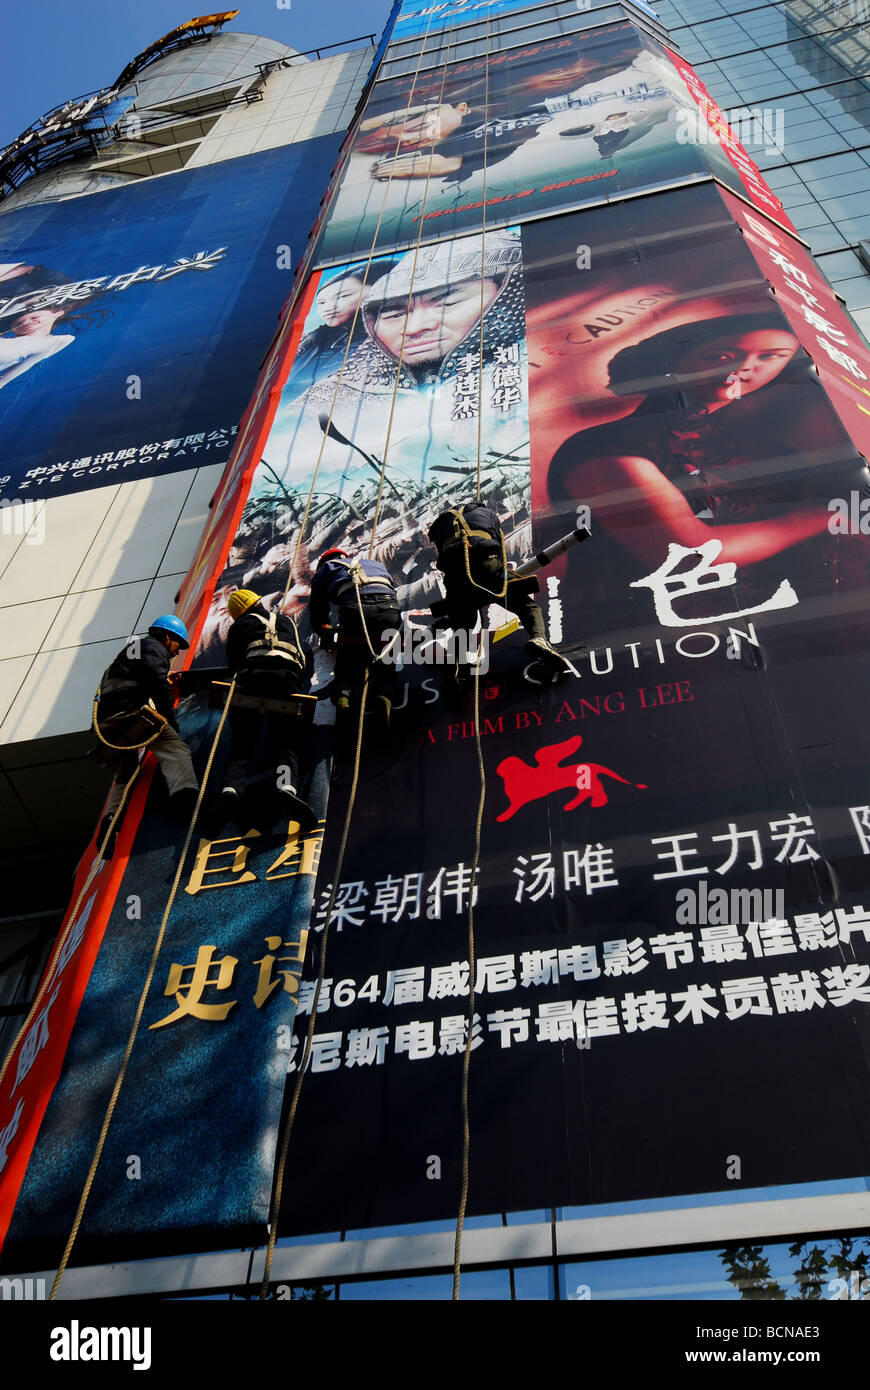 Workers with safety harness taking off large advertisement on the wall of a building, Shanghai, China Stock Photo